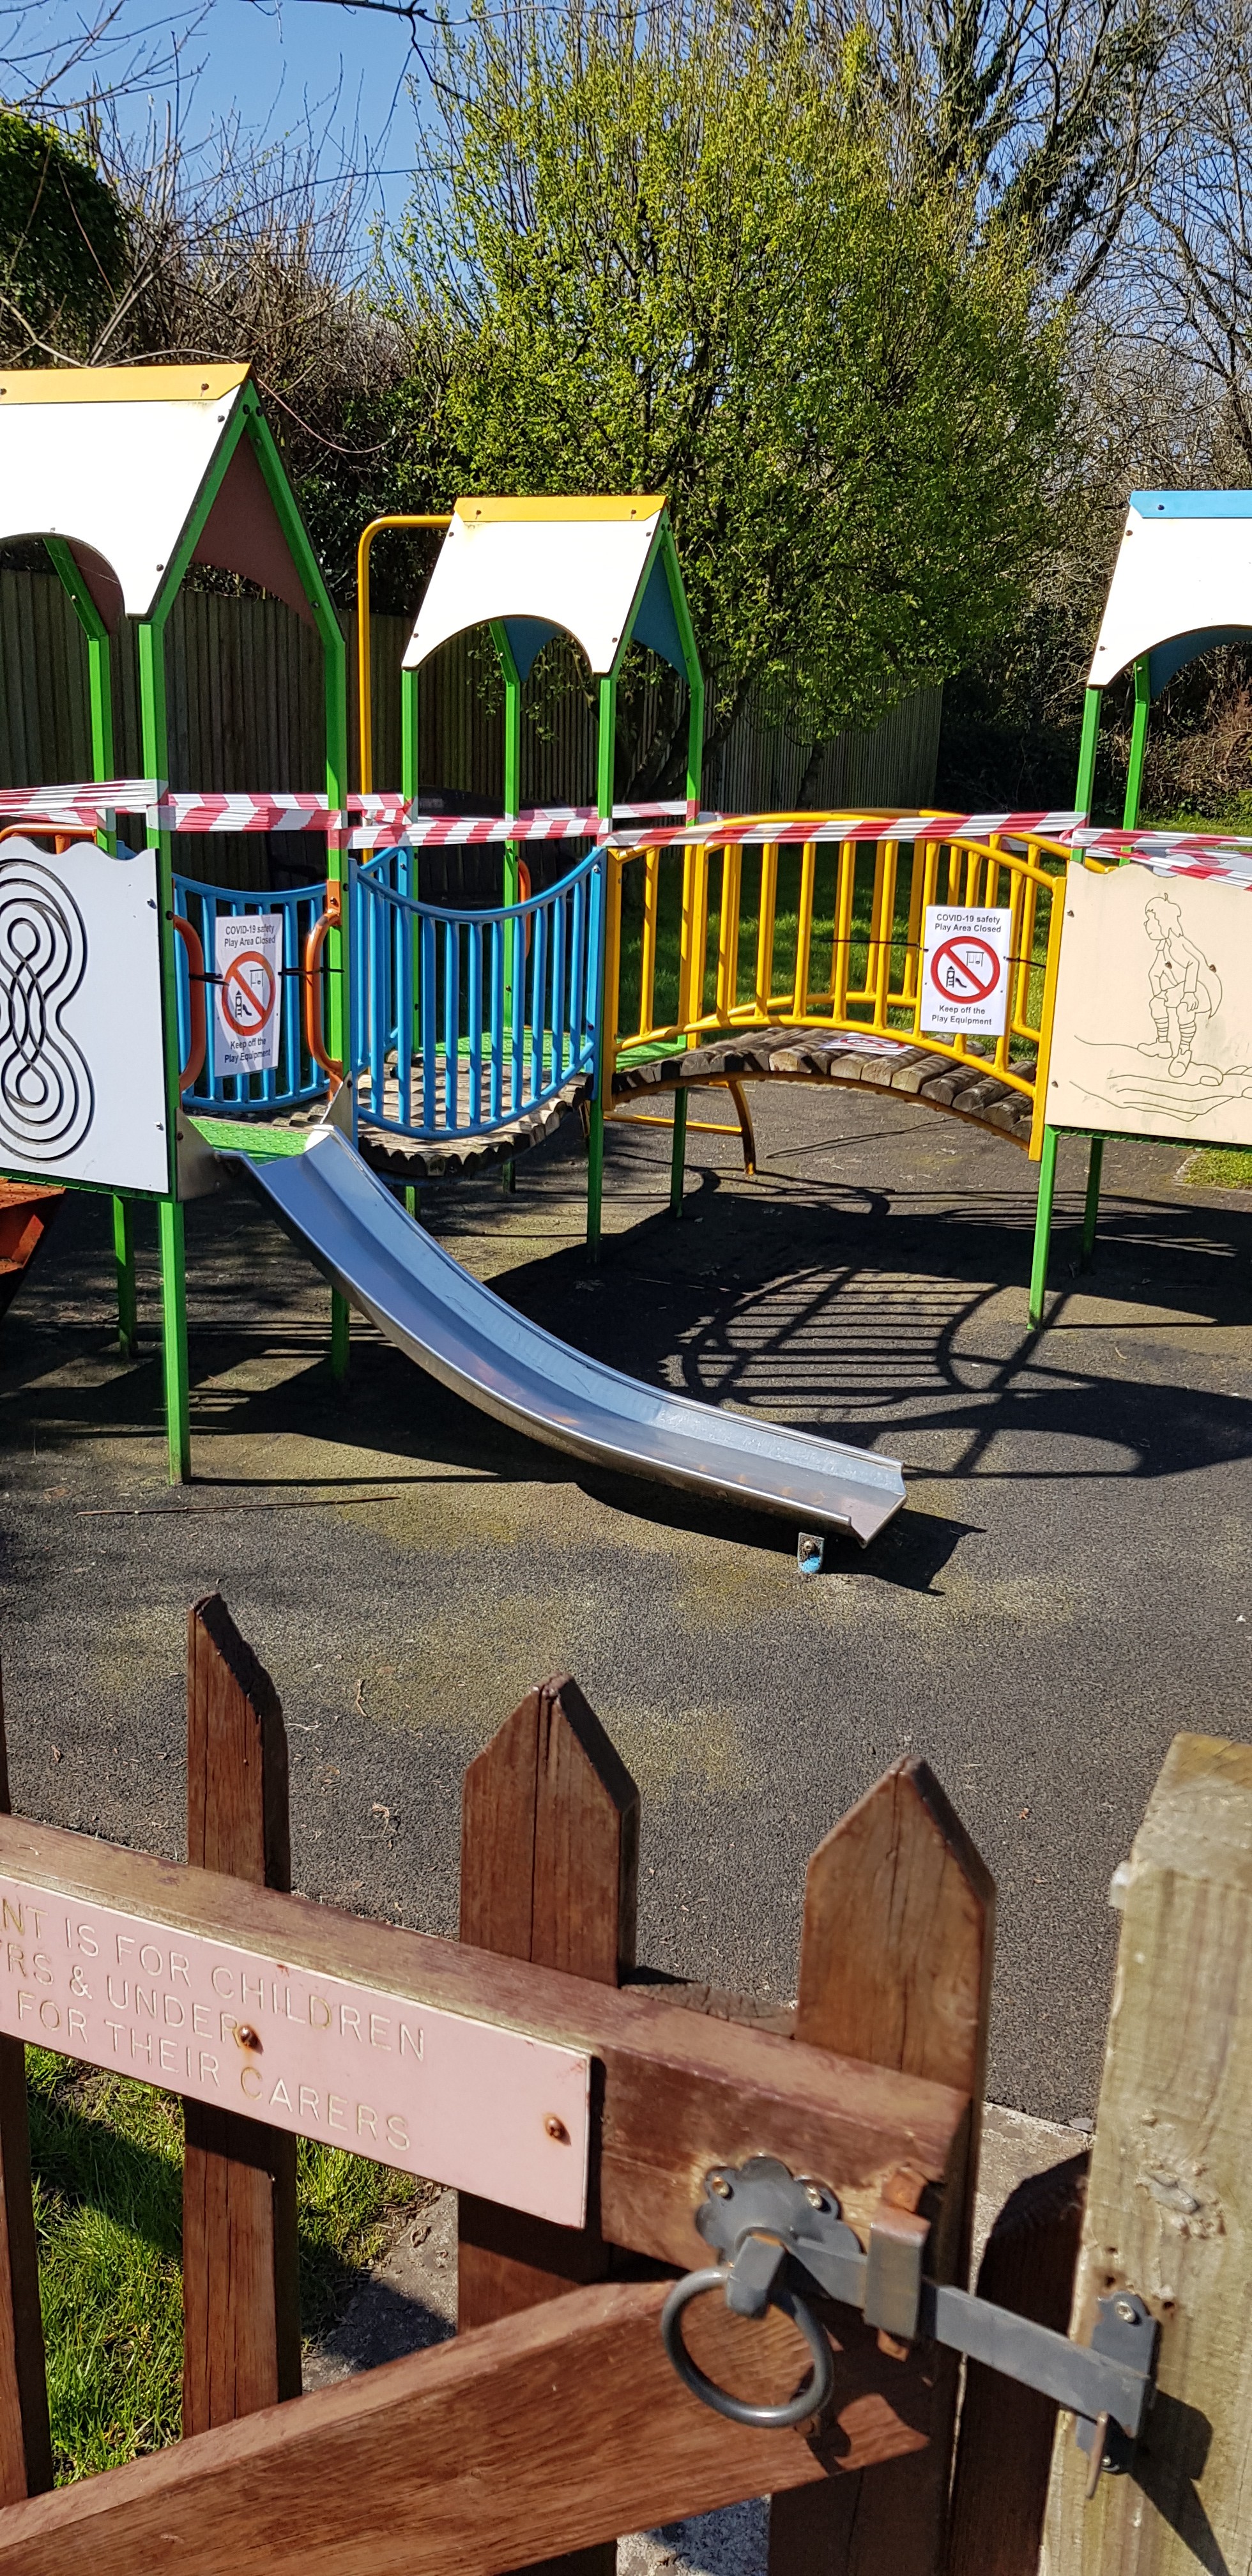 Update on Play Areas